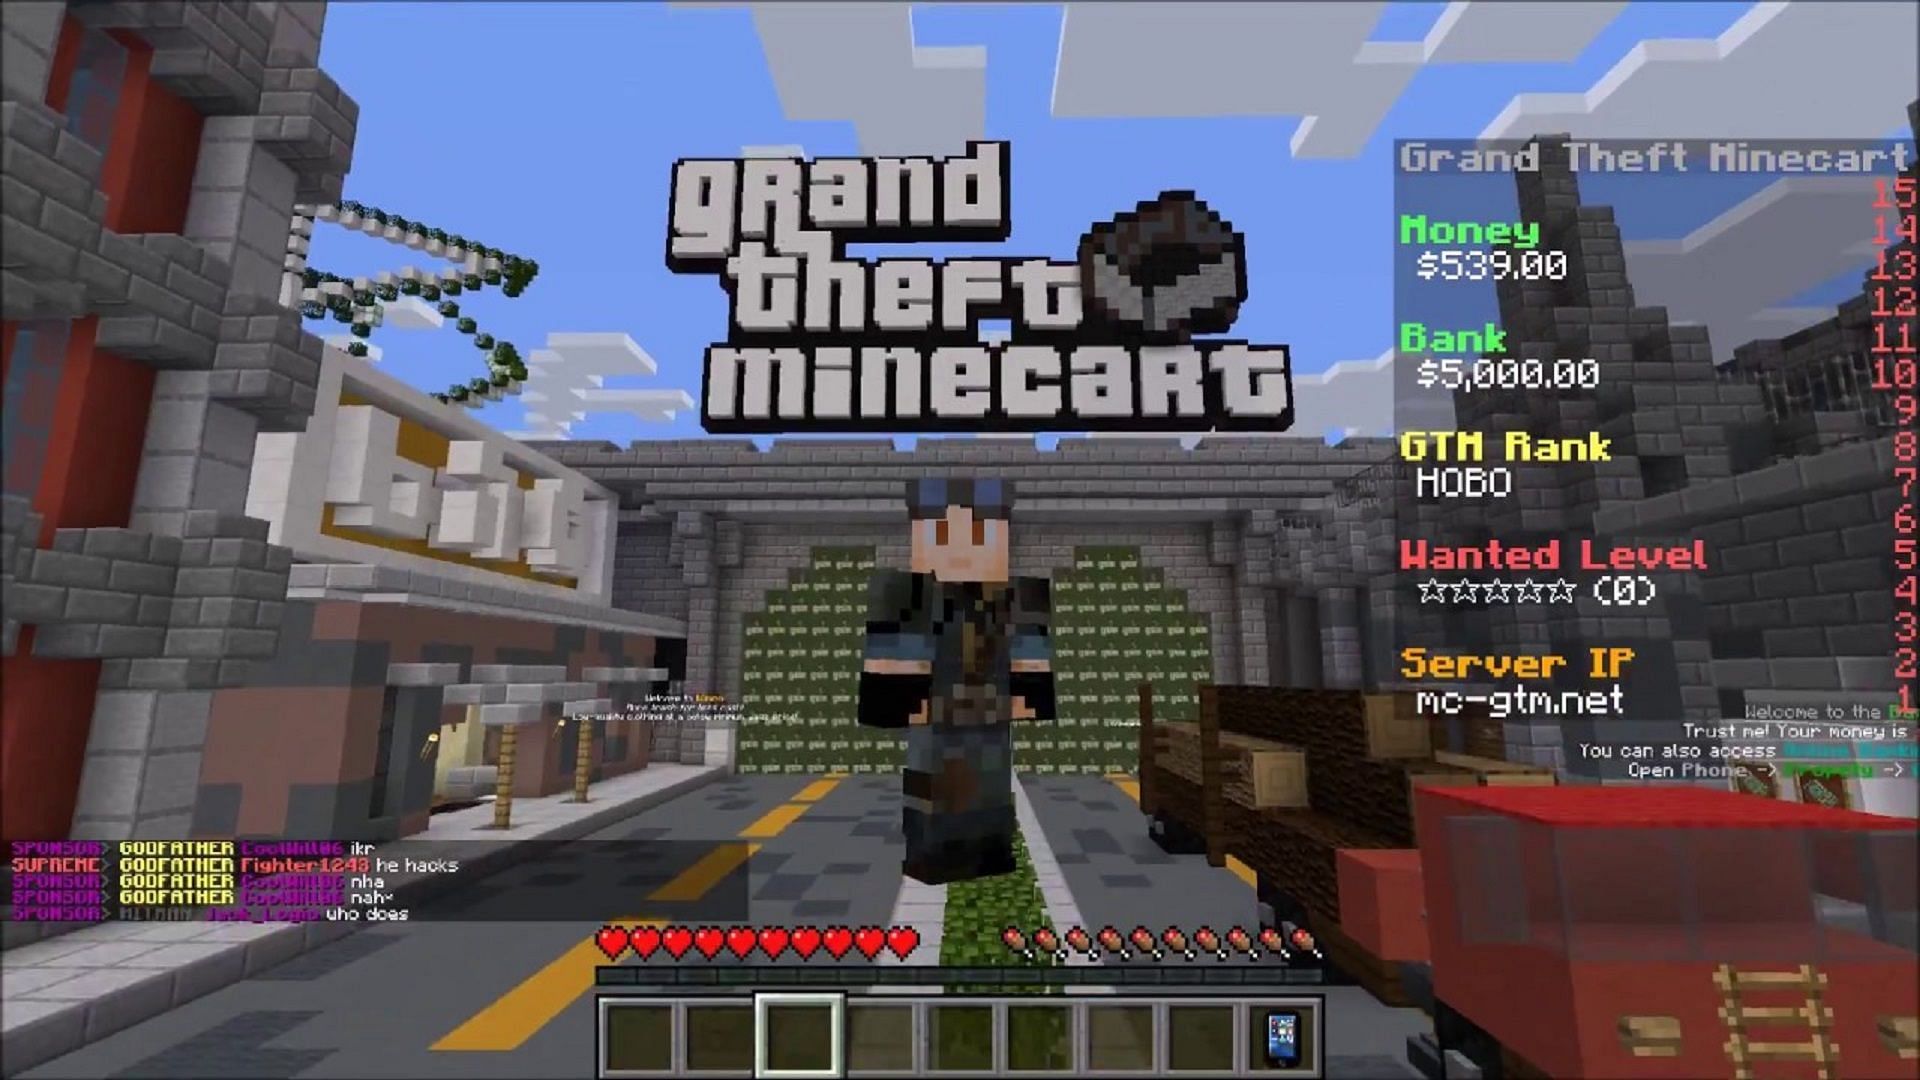 Grand Theft Minecart mixes GTA and Minecraft in a wonderful blend (Image via BattleBall88/YouTube)